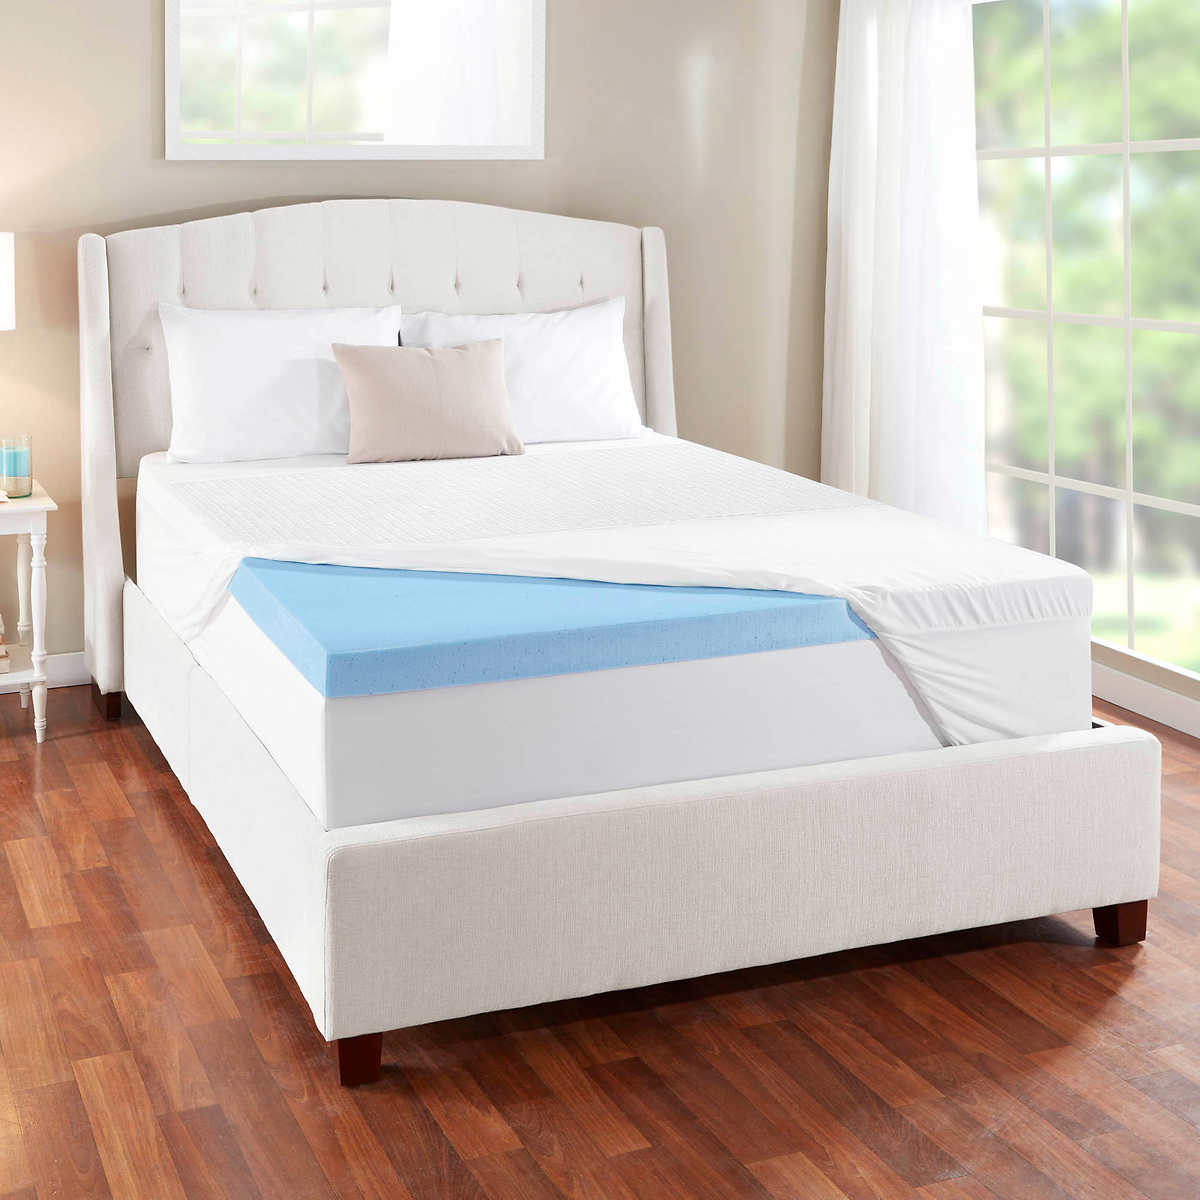 Full Mattress Topper Memory Foam Pad Cover Protector Matress Bed White 4 Inch